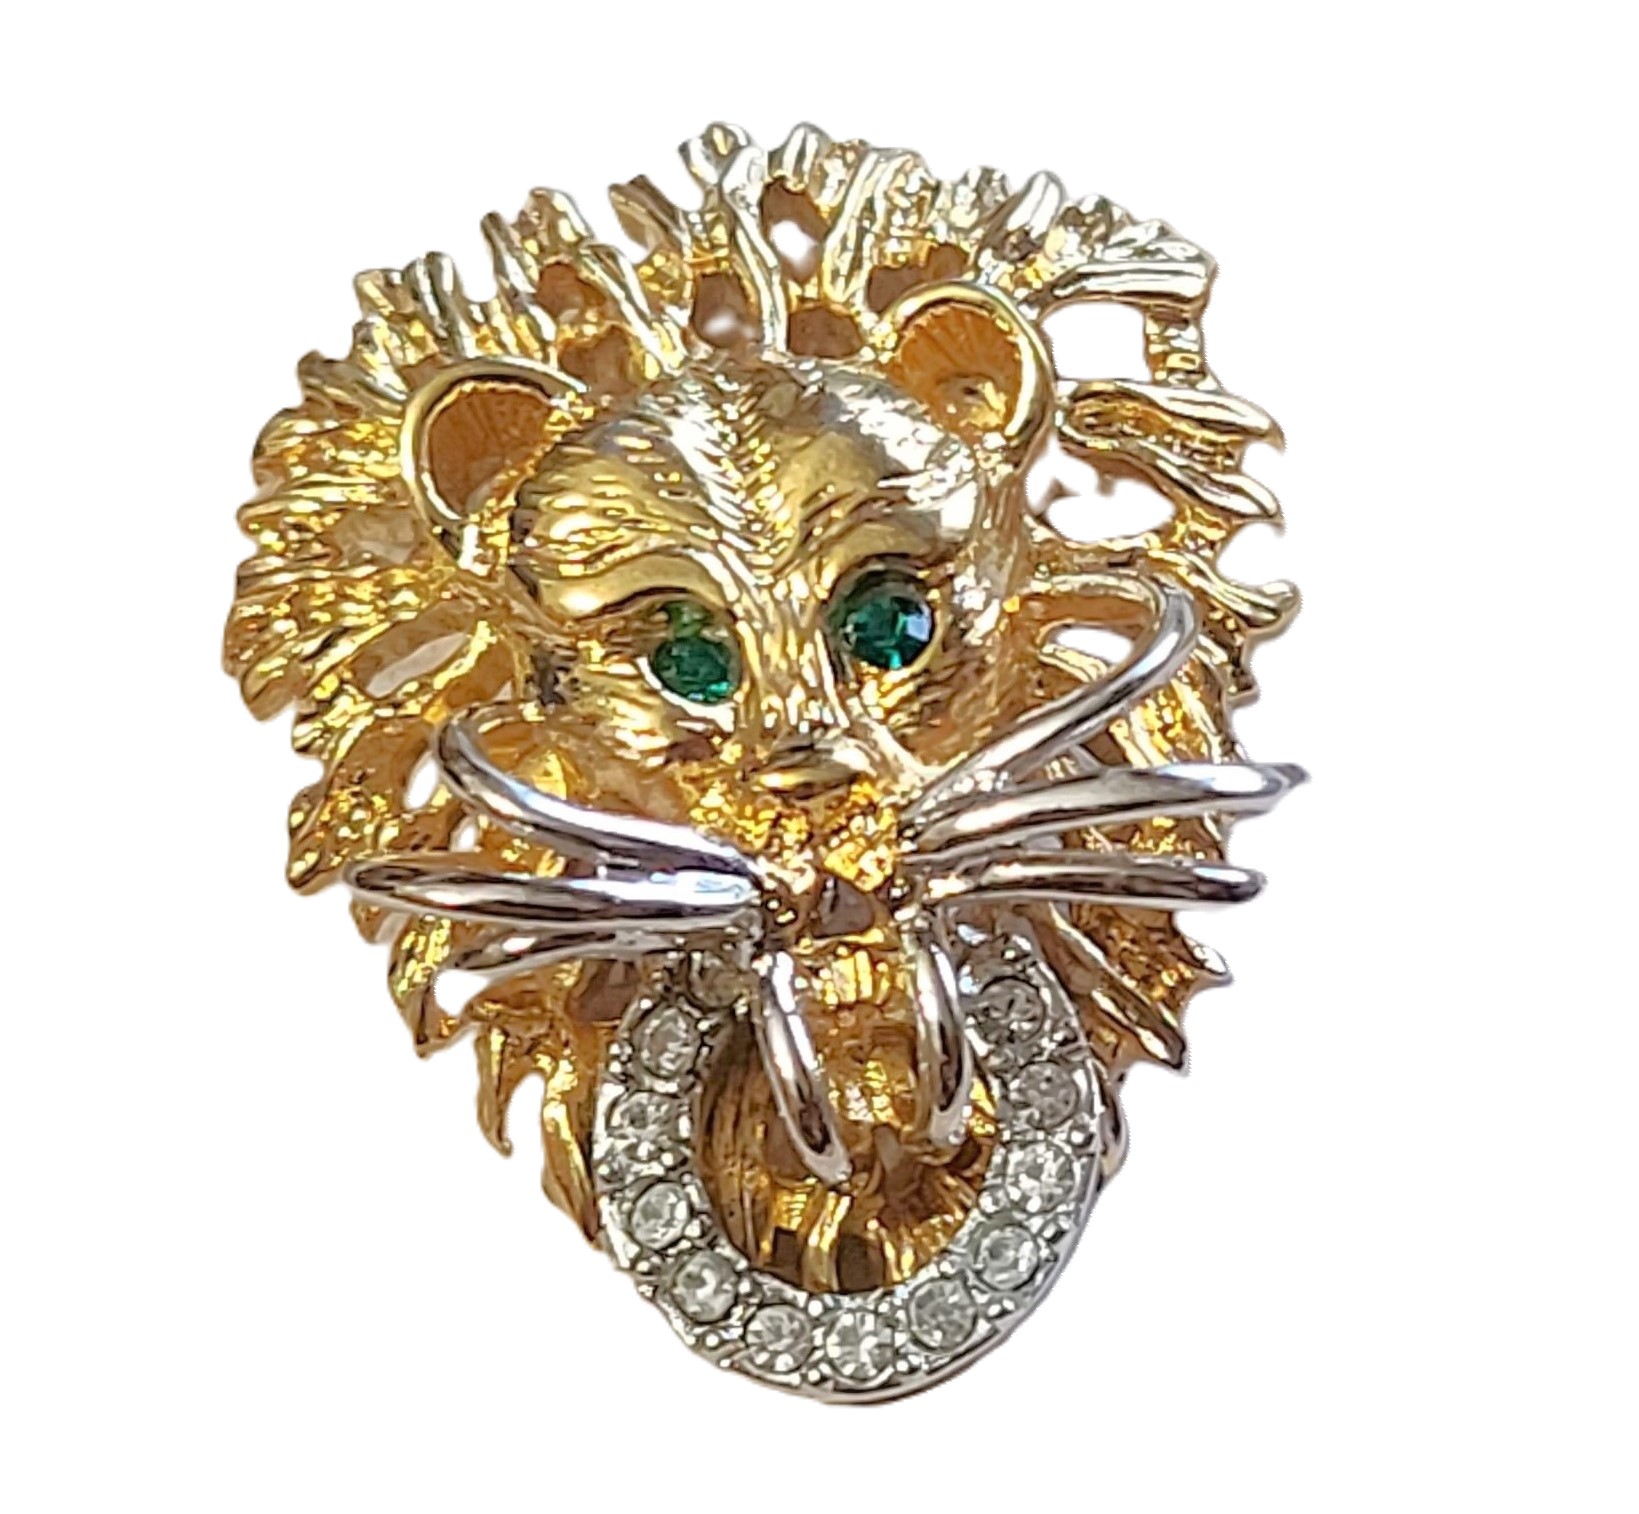 Lion pendant slide, for scarf or chain, green rhinestone eyes - Click Image to Close